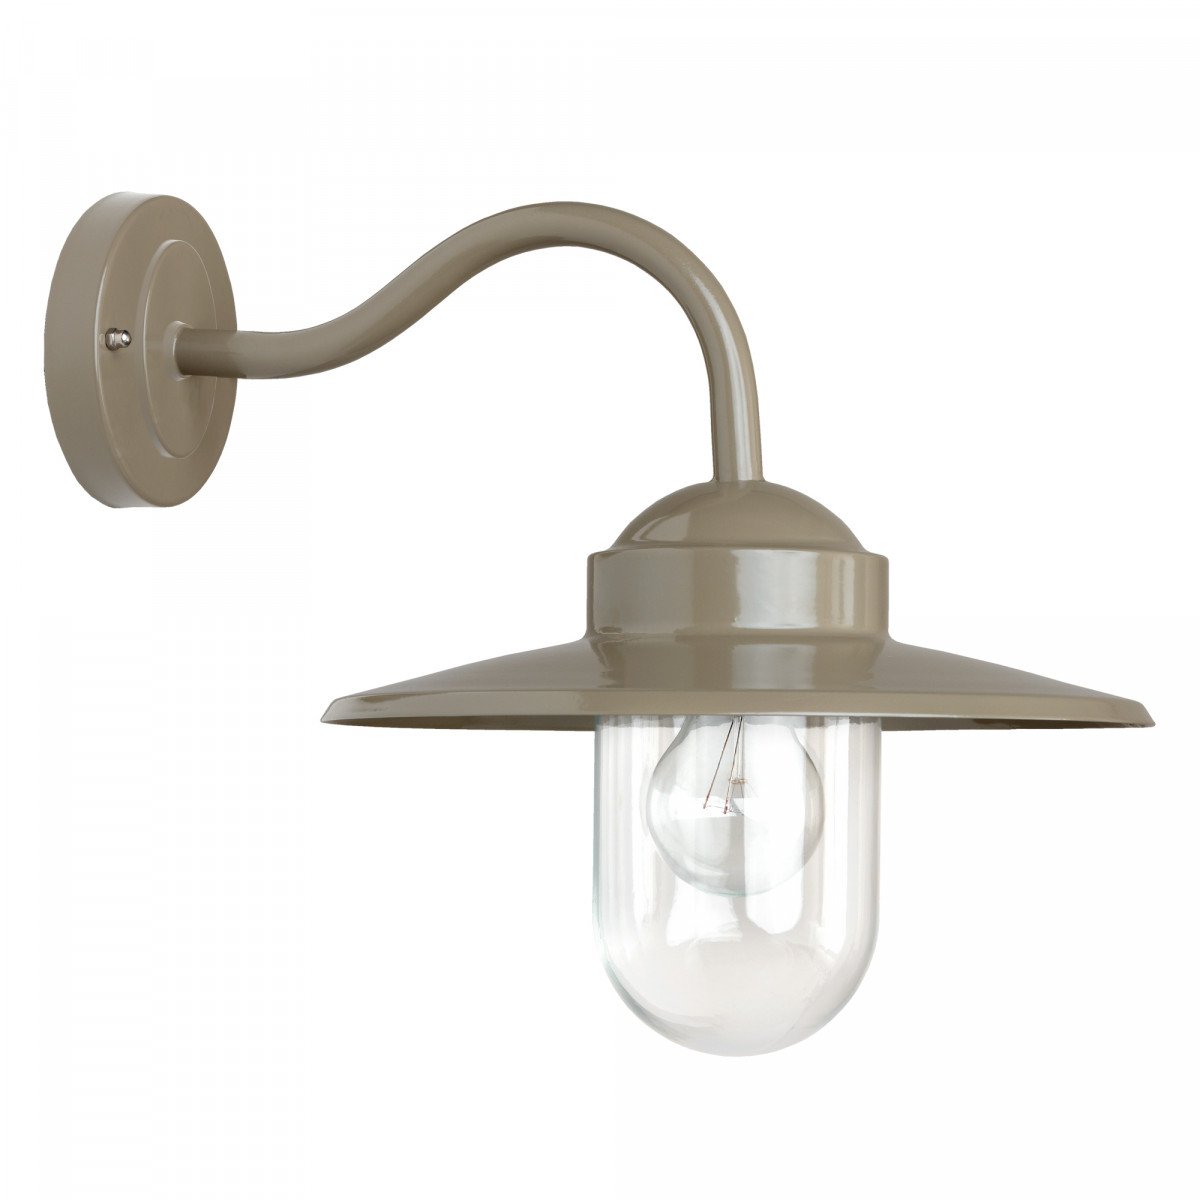 Muurlamp Dolce taupe